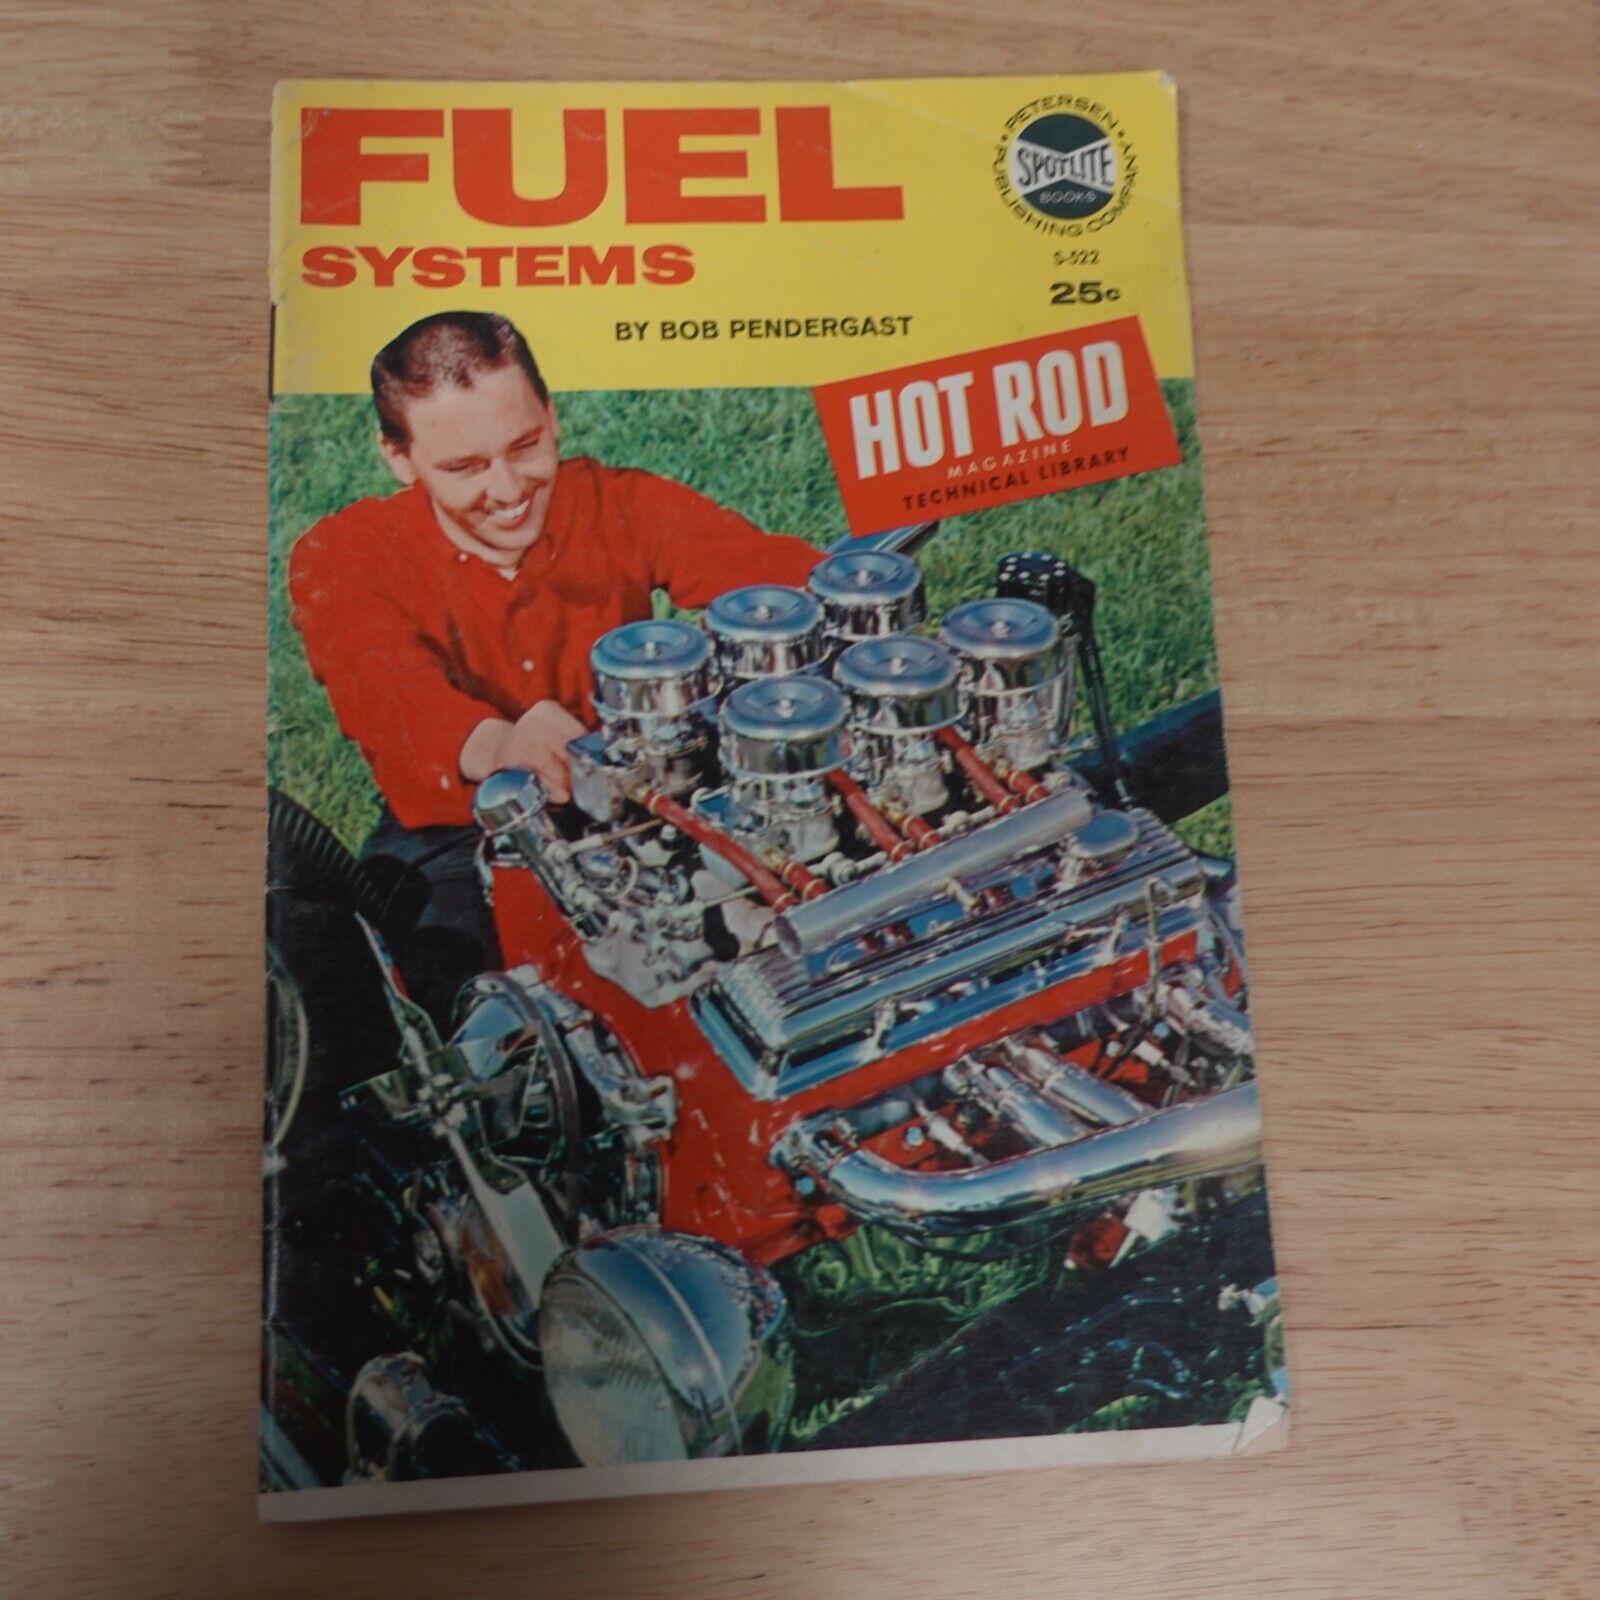 Bob Pendergast: FUEL SYSTEMS by HOT ROD magazine 1962